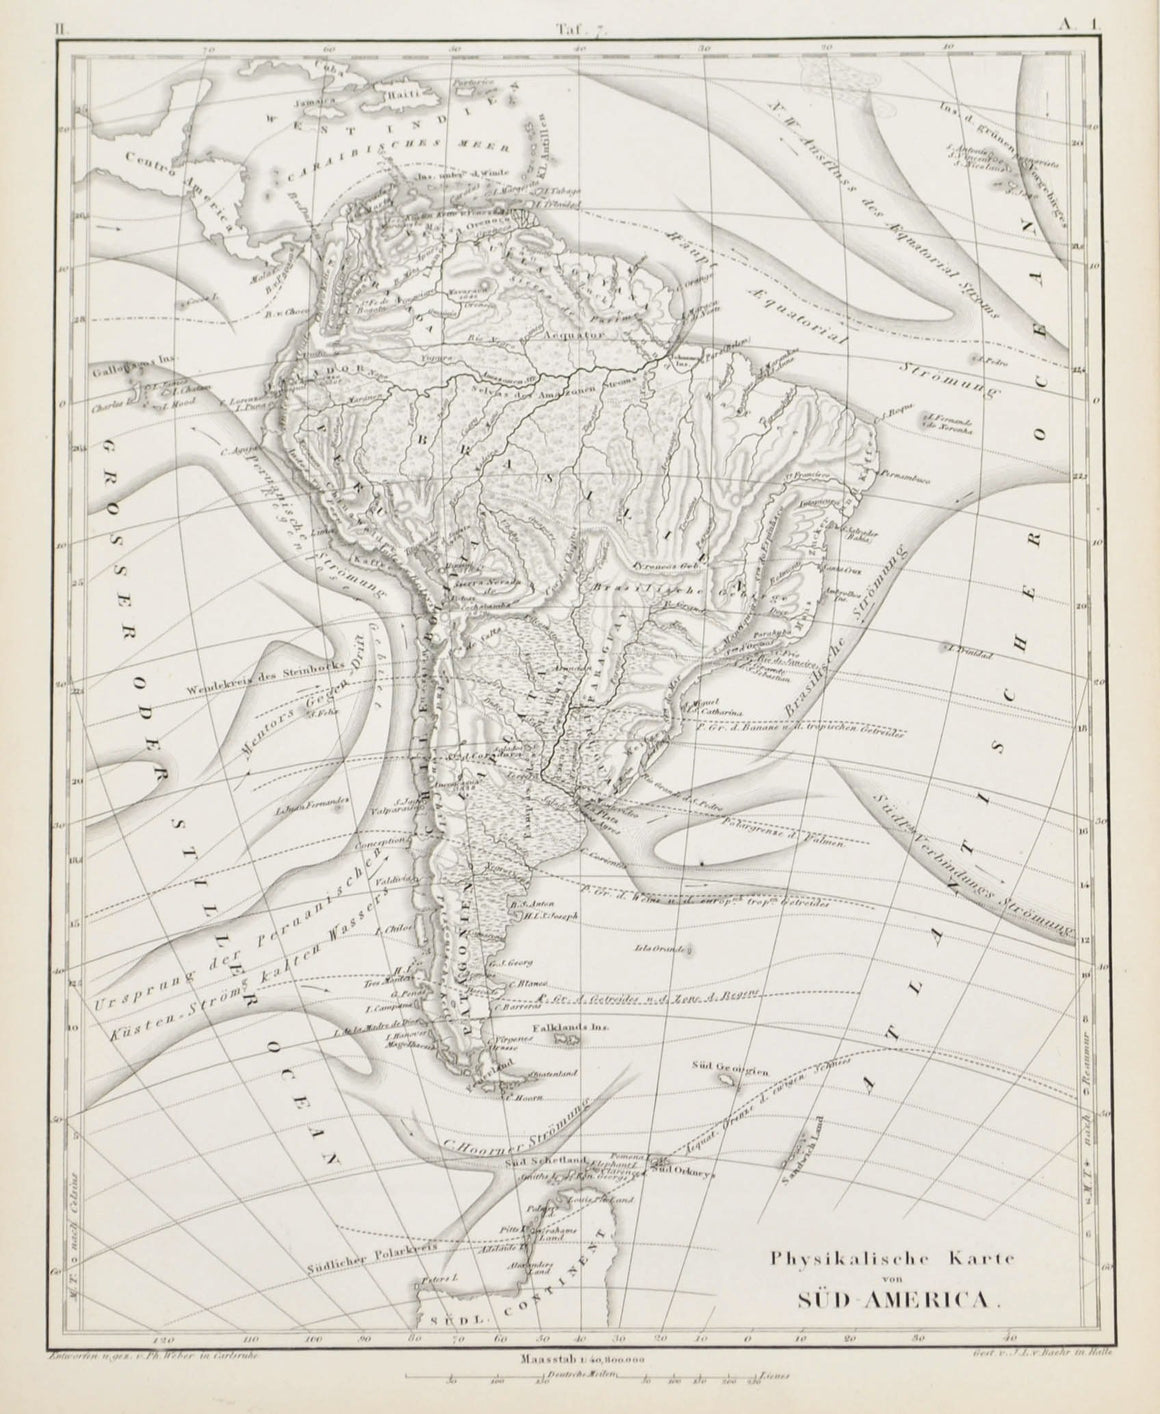 1857 Tef 7 Physical Map of South America - JG Heck